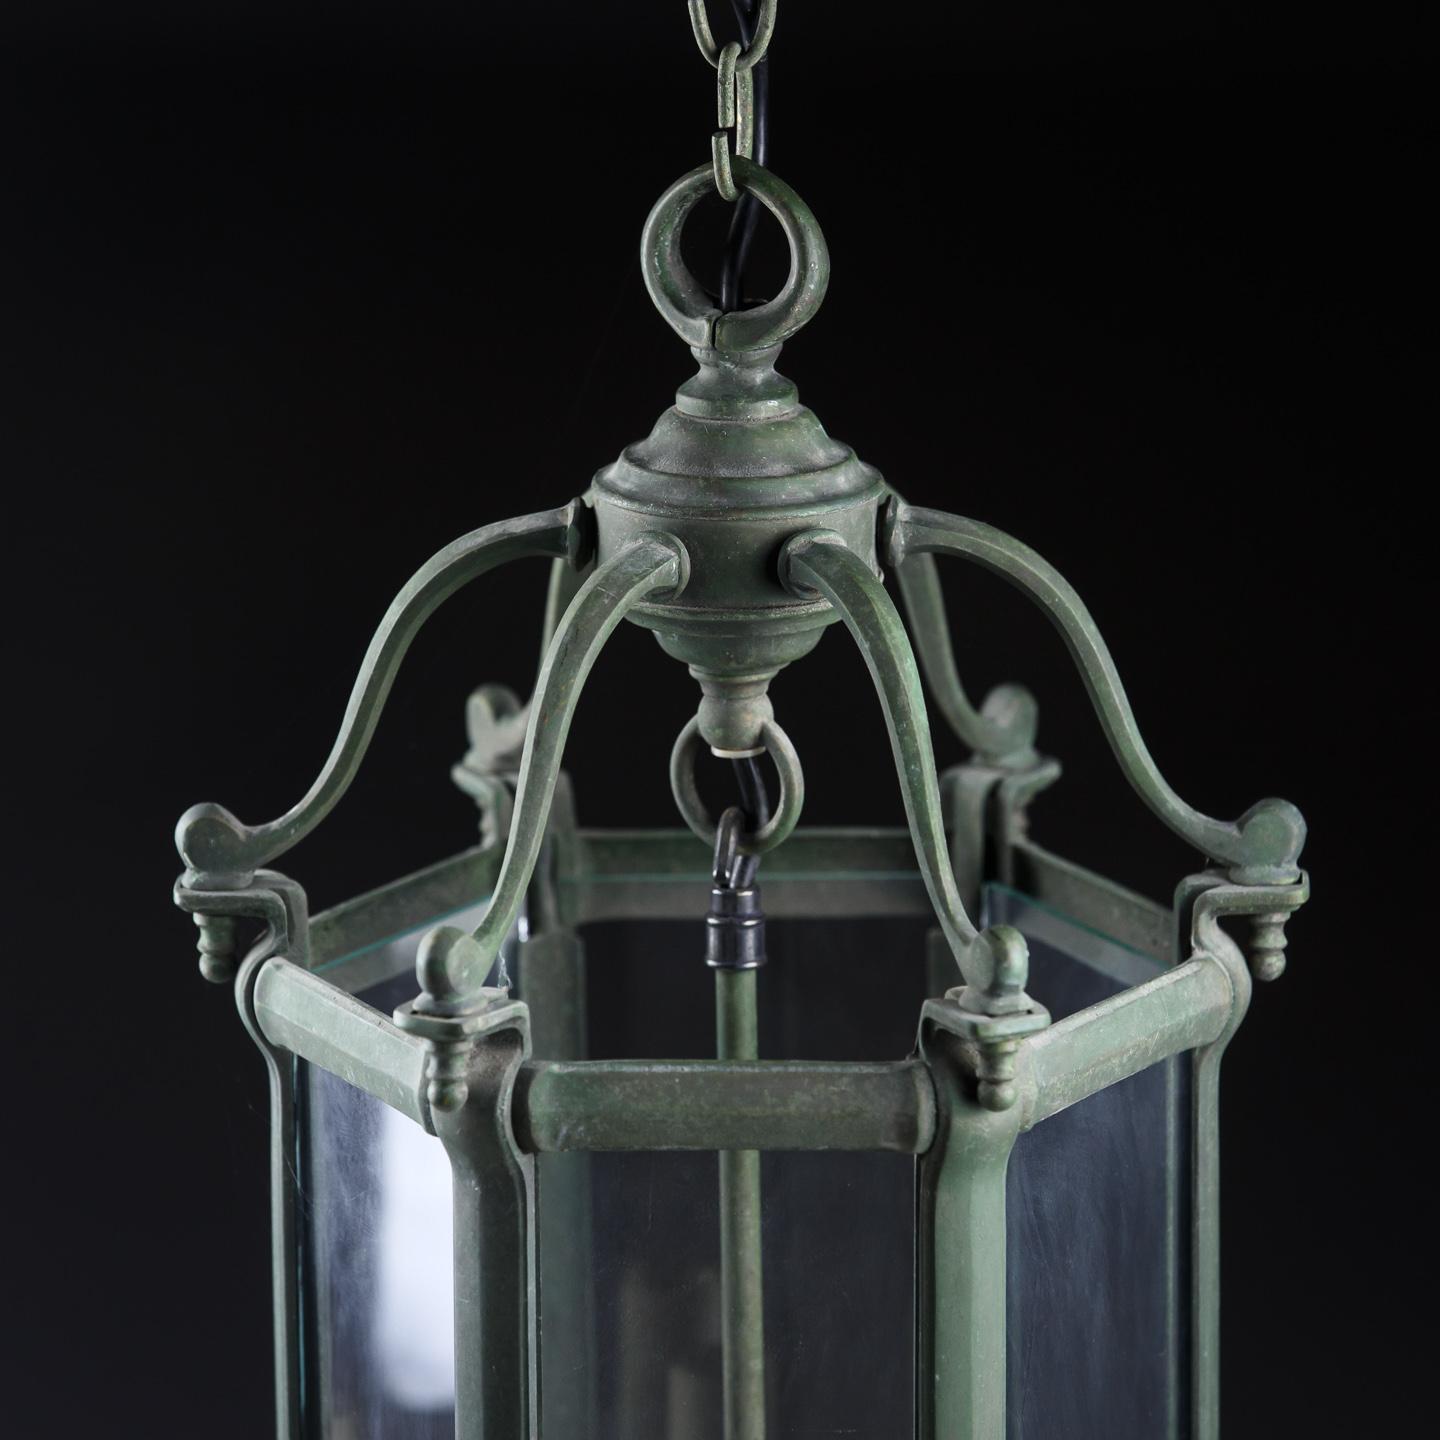 French 20th Century Verdigris Bronze Lantern In Good Condition For Sale In Pease pottage, West Sussex